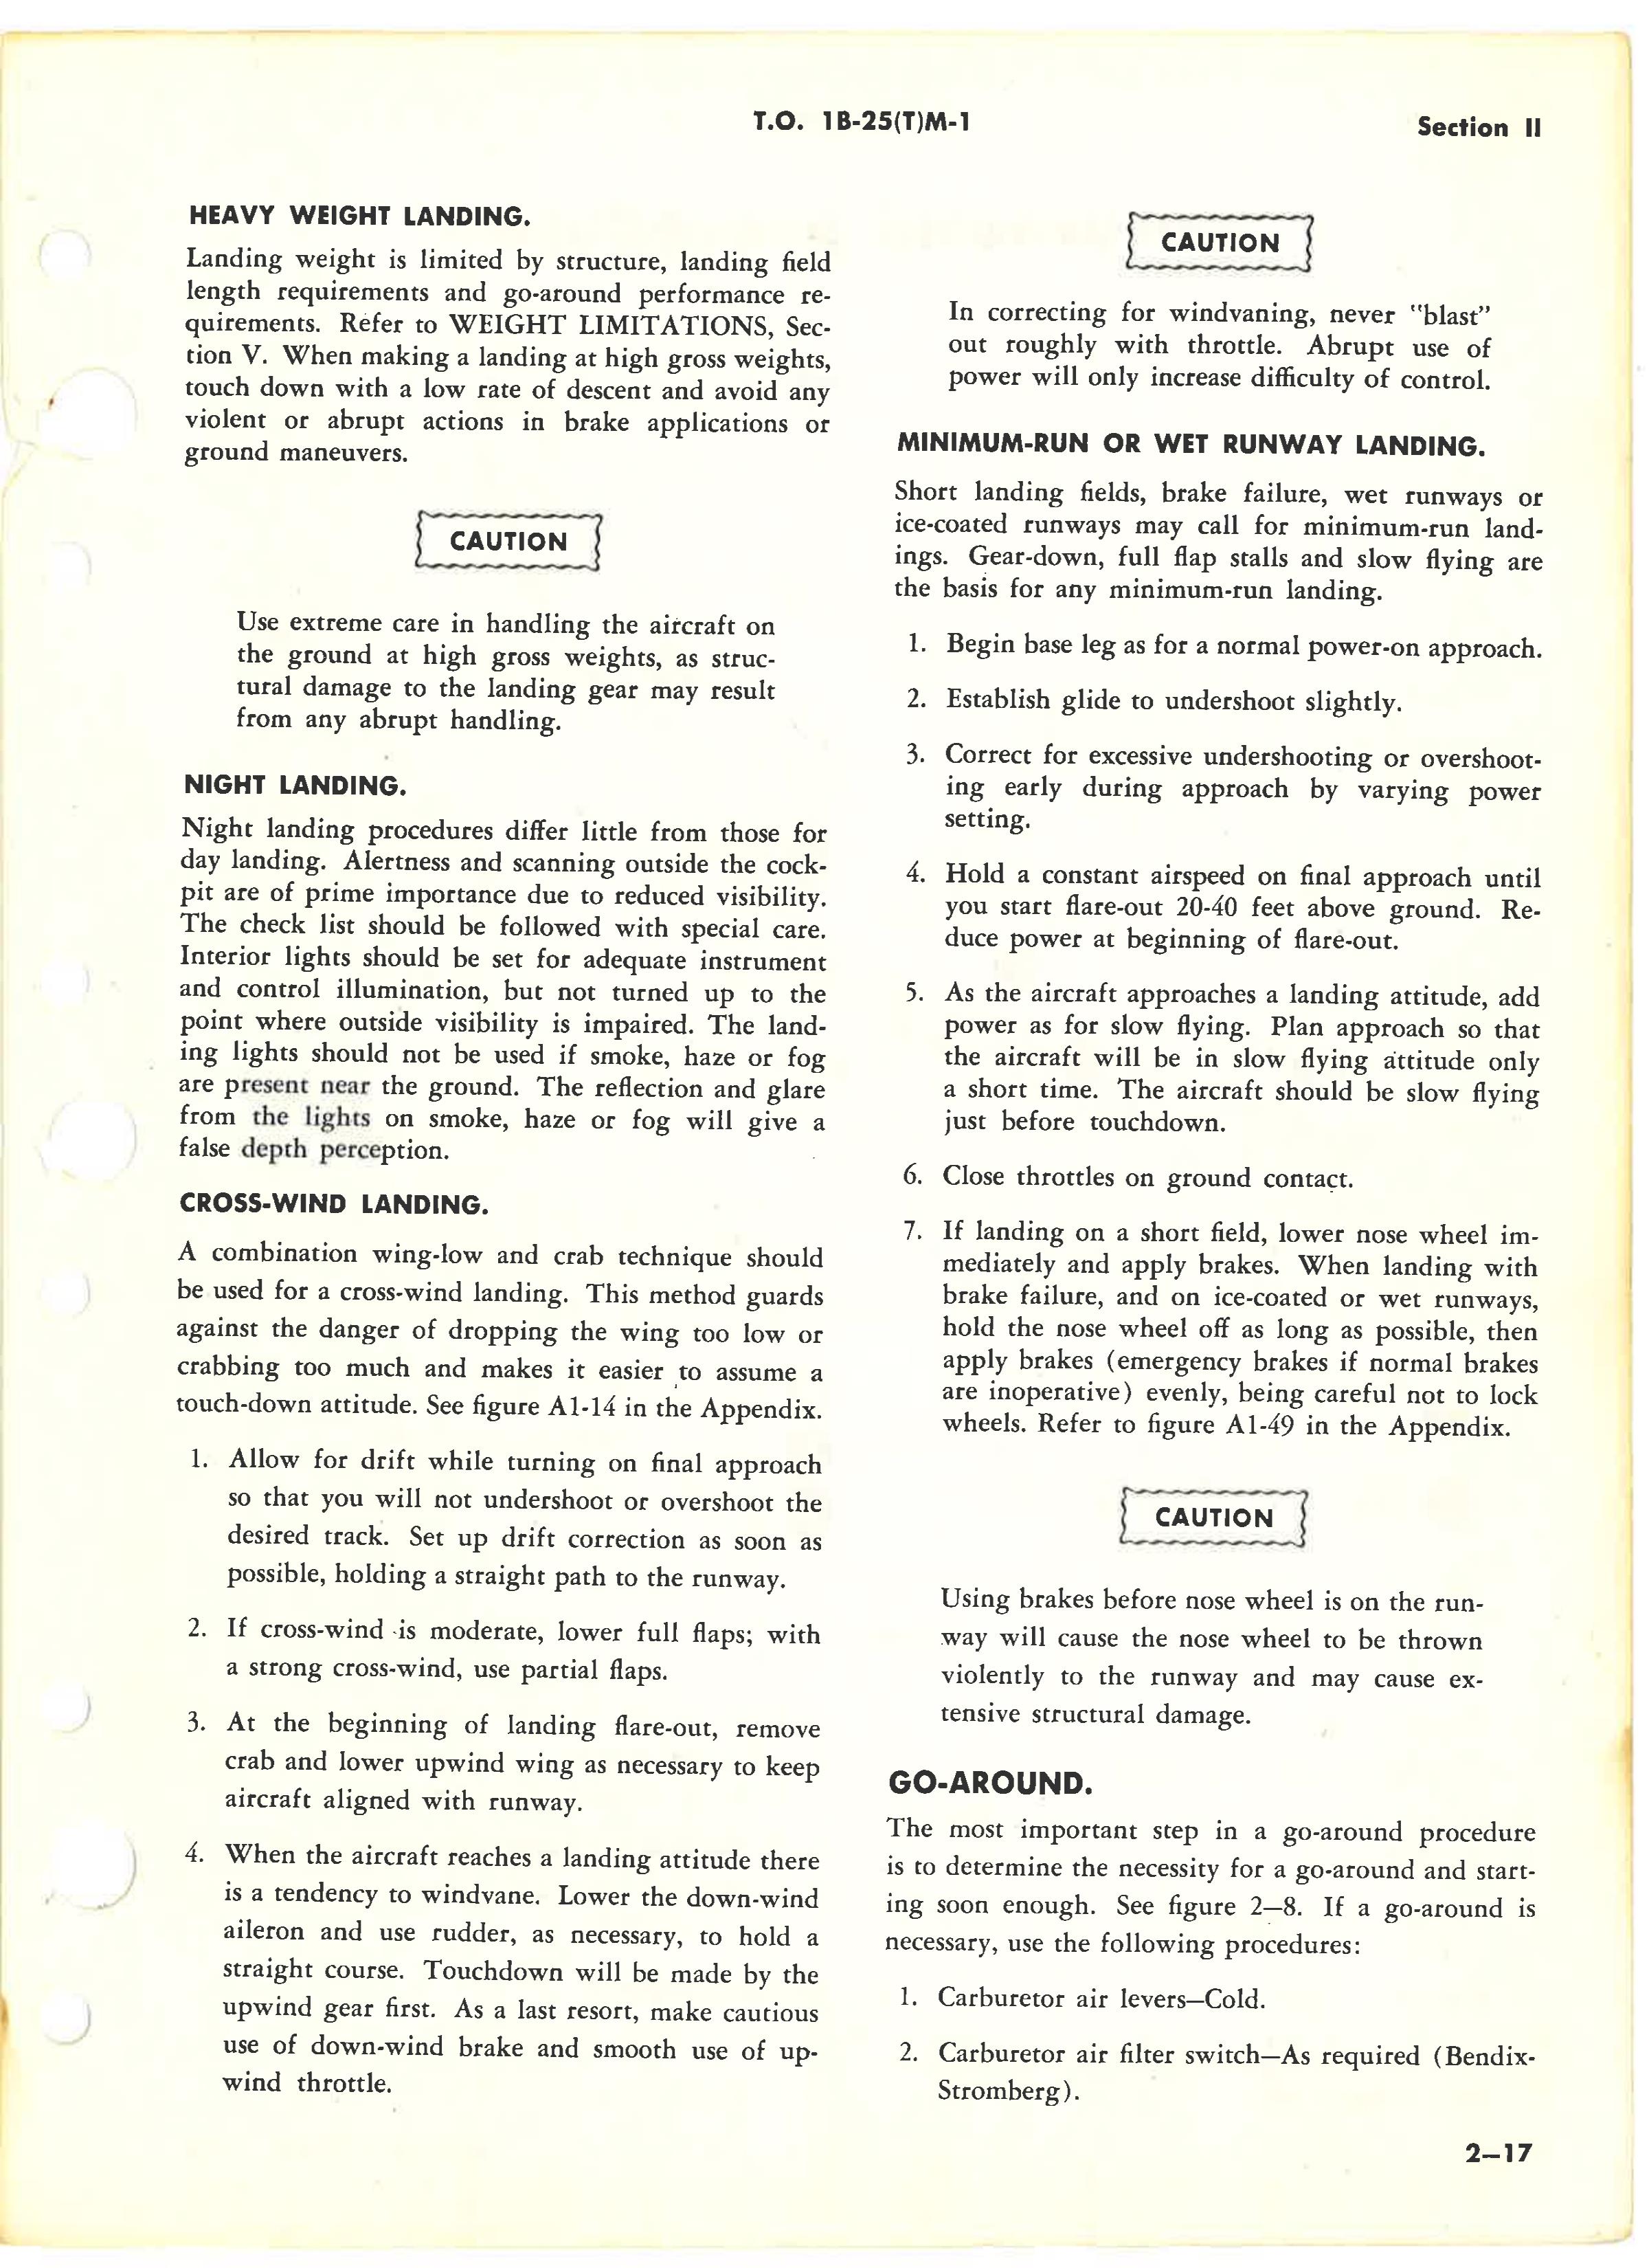 Sample page 67 from AirCorps Library document: Flight Handbook - TB-25M Aircraft